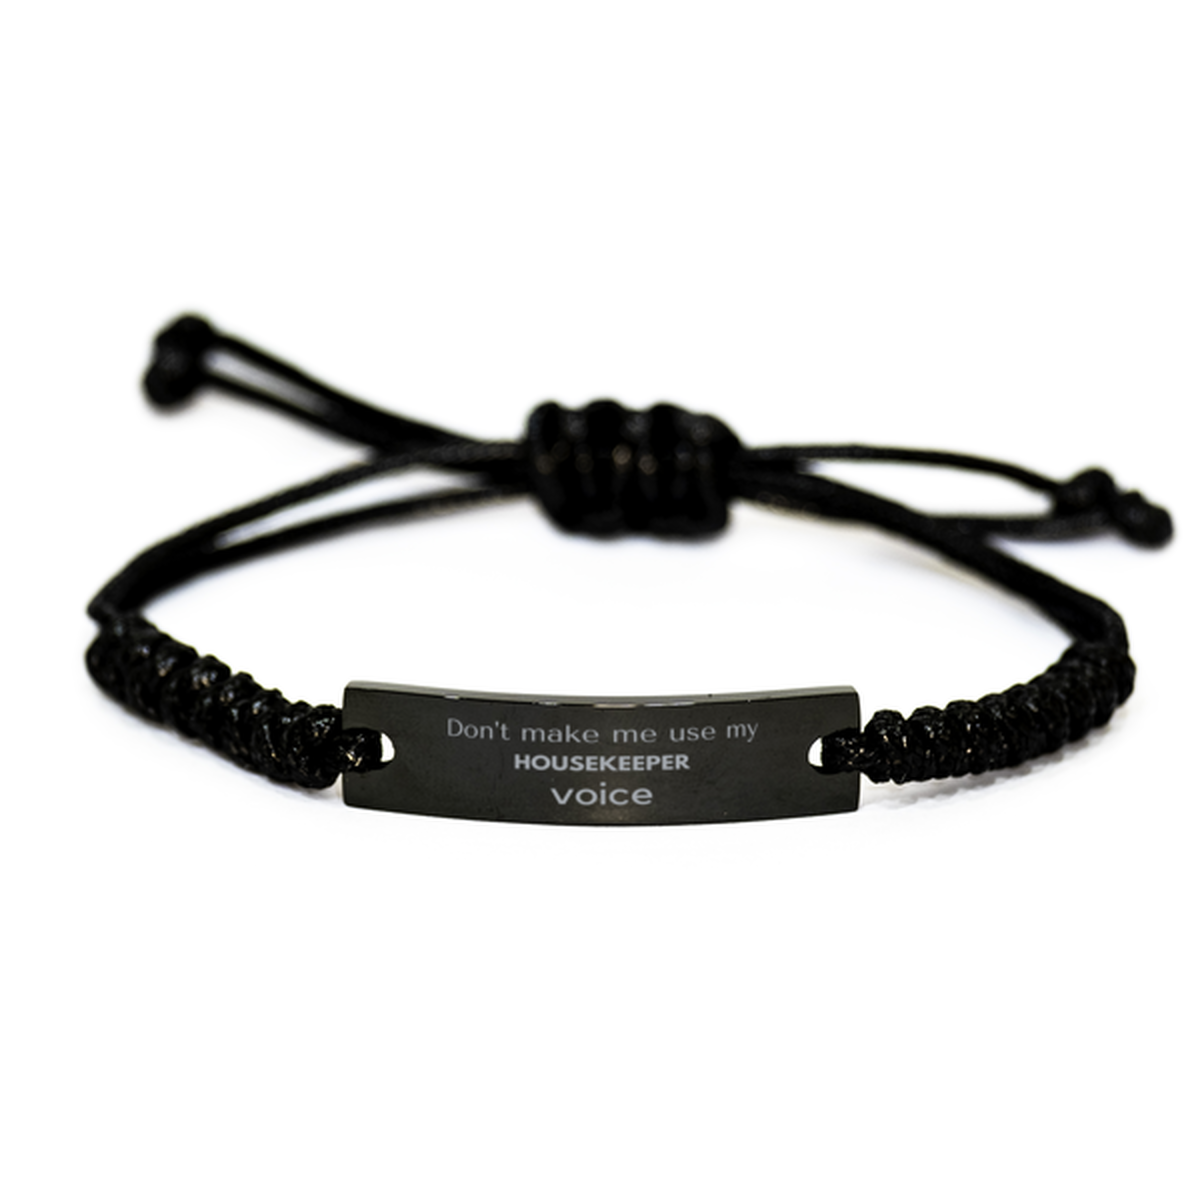 Don't make me use my Housekeeper voice, Sarcasm Housekeeper Gifts, Christmas Housekeeper Black Rope Bracelet Birthday Unique Gifts For Housekeeper Coworkers, Men, Women, Colleague, Friends